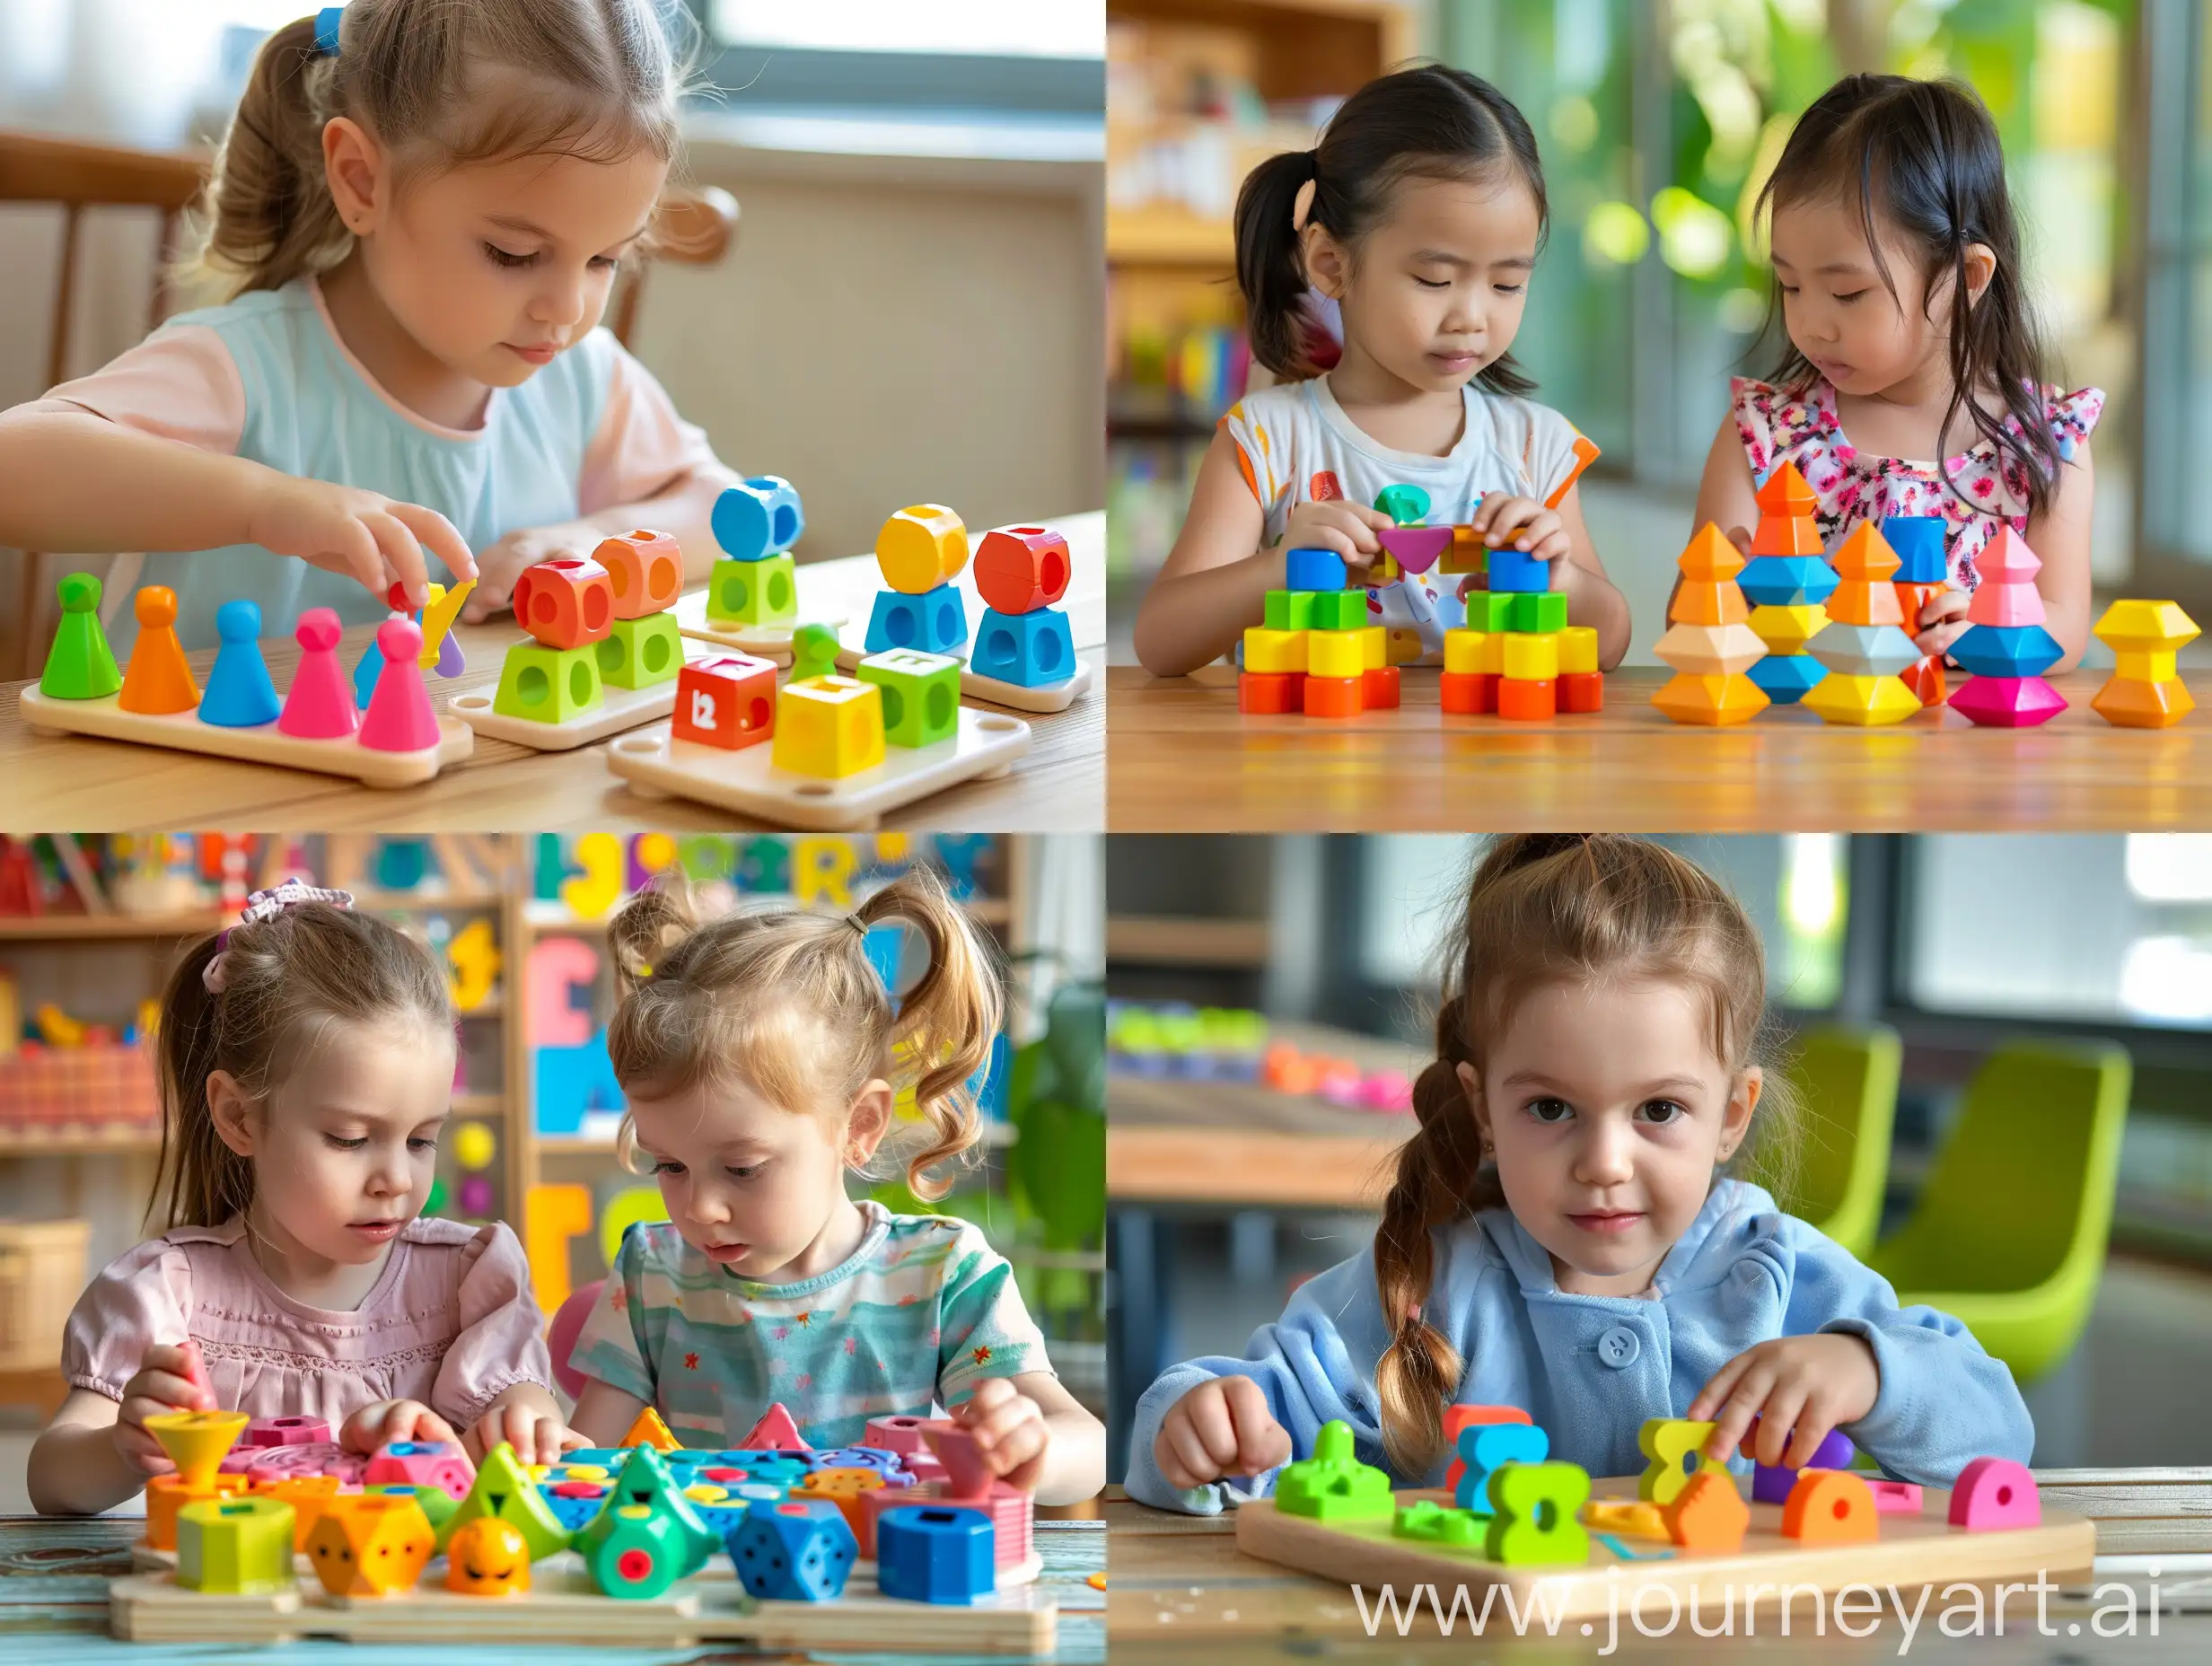 Toddlers-Engage-in-Educational-Play-with-Shapes-and-Colors